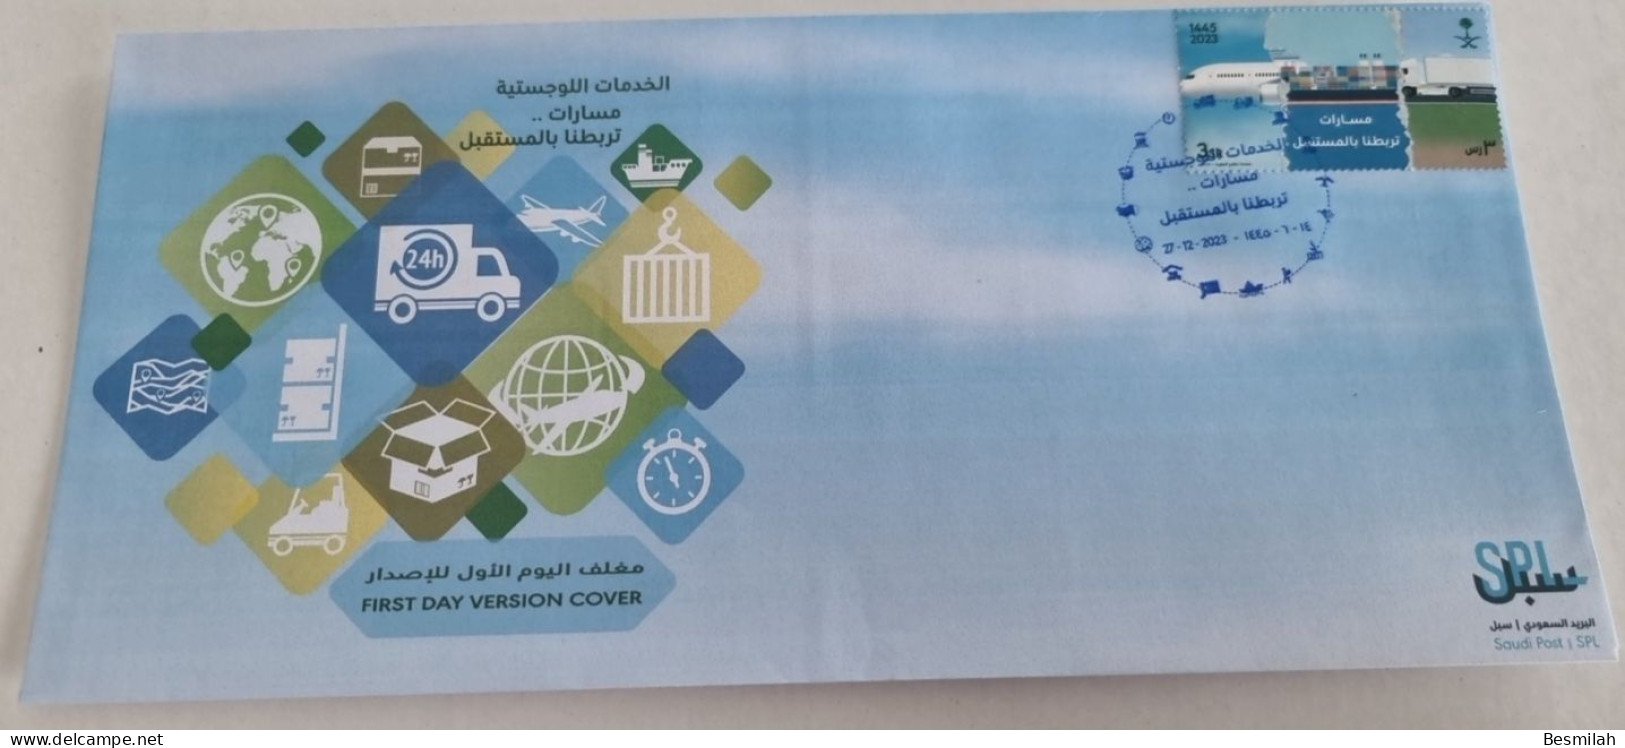 Saudi Arabia Stamp Logistic Services 2023 (1445 Hijry) 7 Pieces Of 3 Riyals + First Day Version Cover - Saudi Arabia